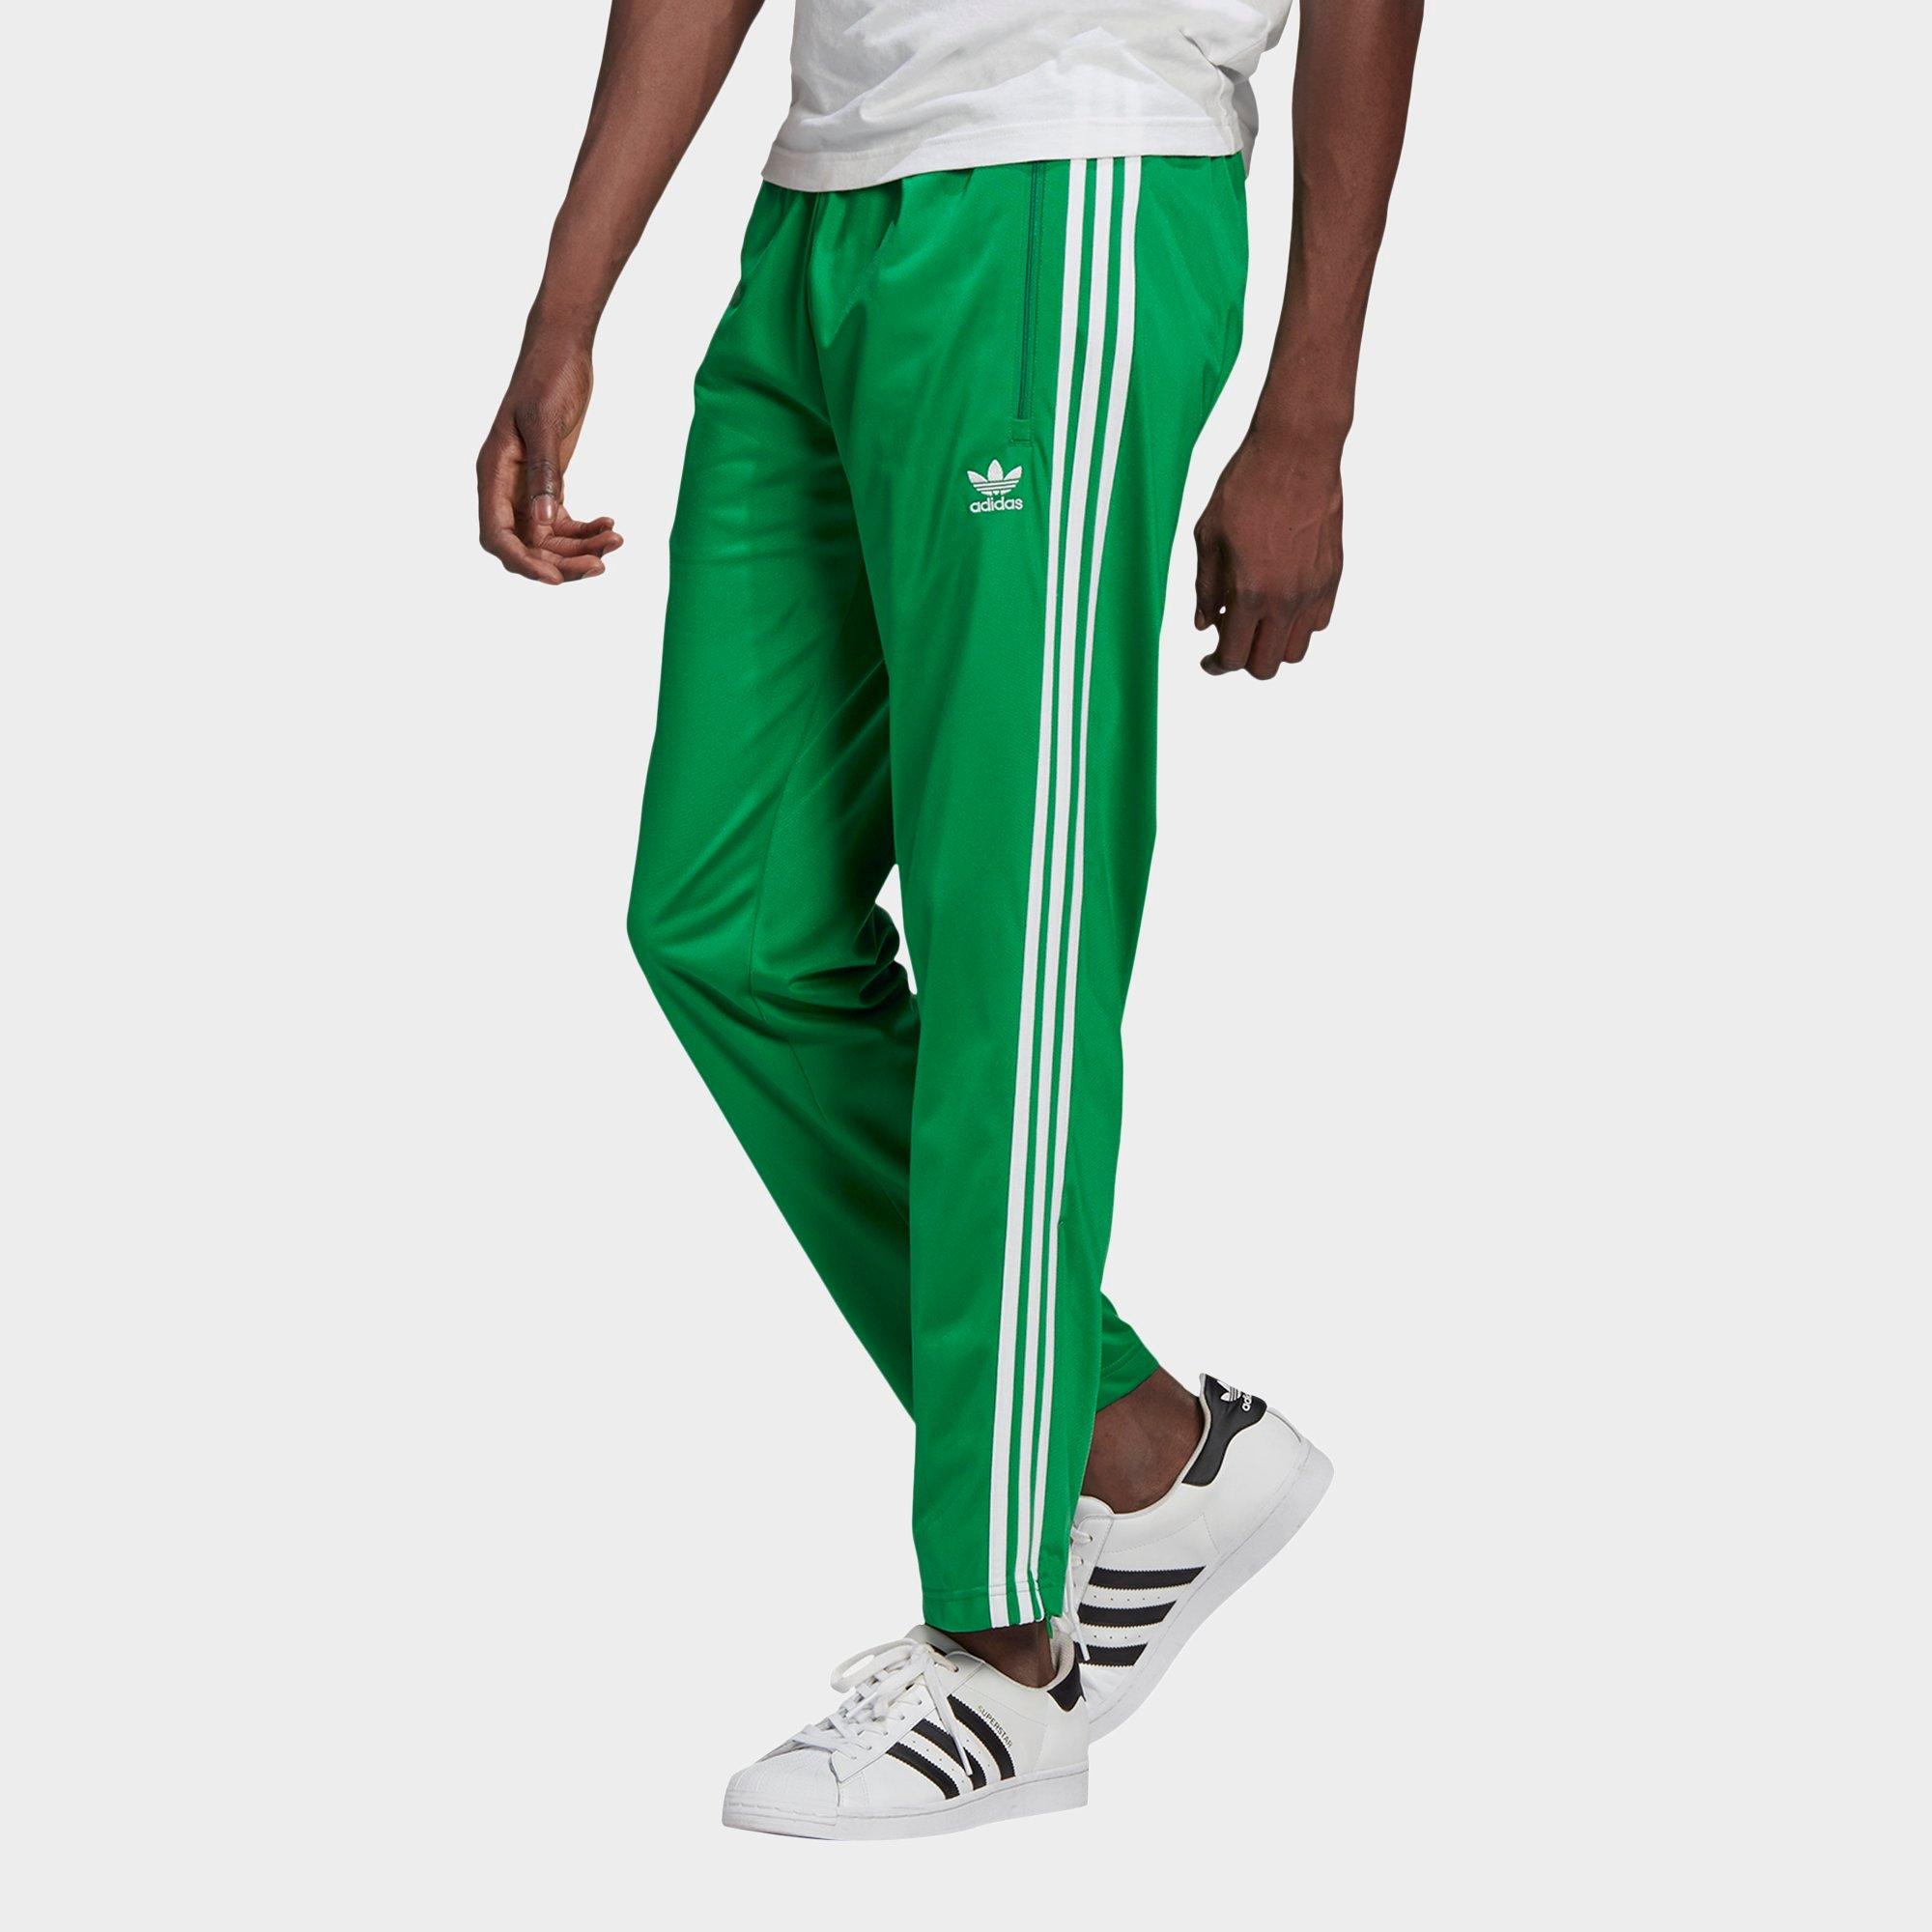 adidas trousers green